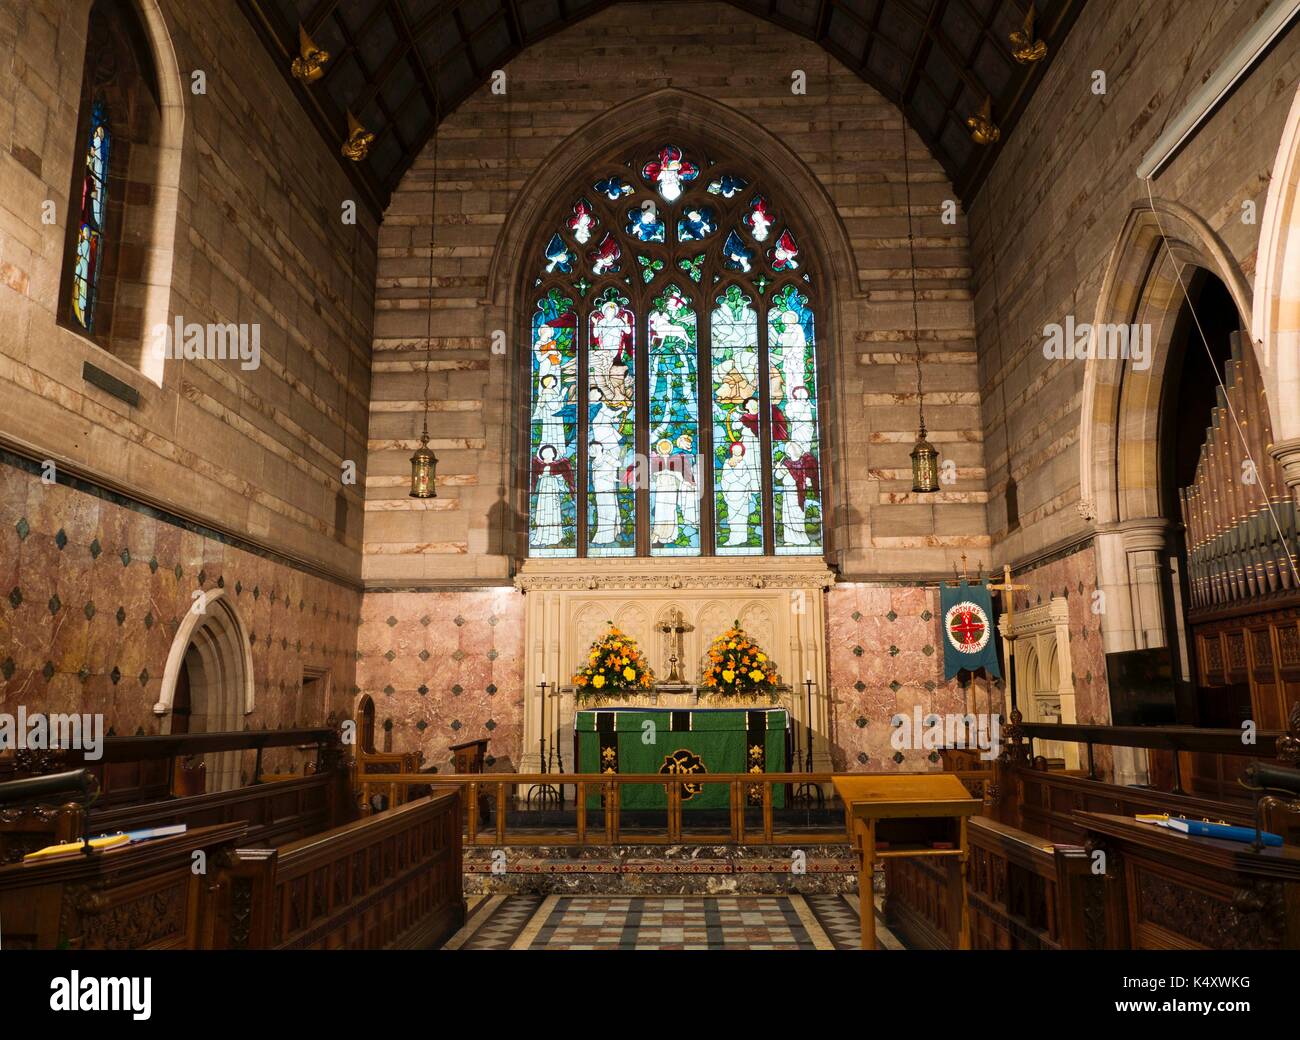 Stained glass windows by Edward Burne-Jones, Church of All Hallows, Allerton, Liverpool, Church is noted for its stained glass windows and sculptures. Stock Photo